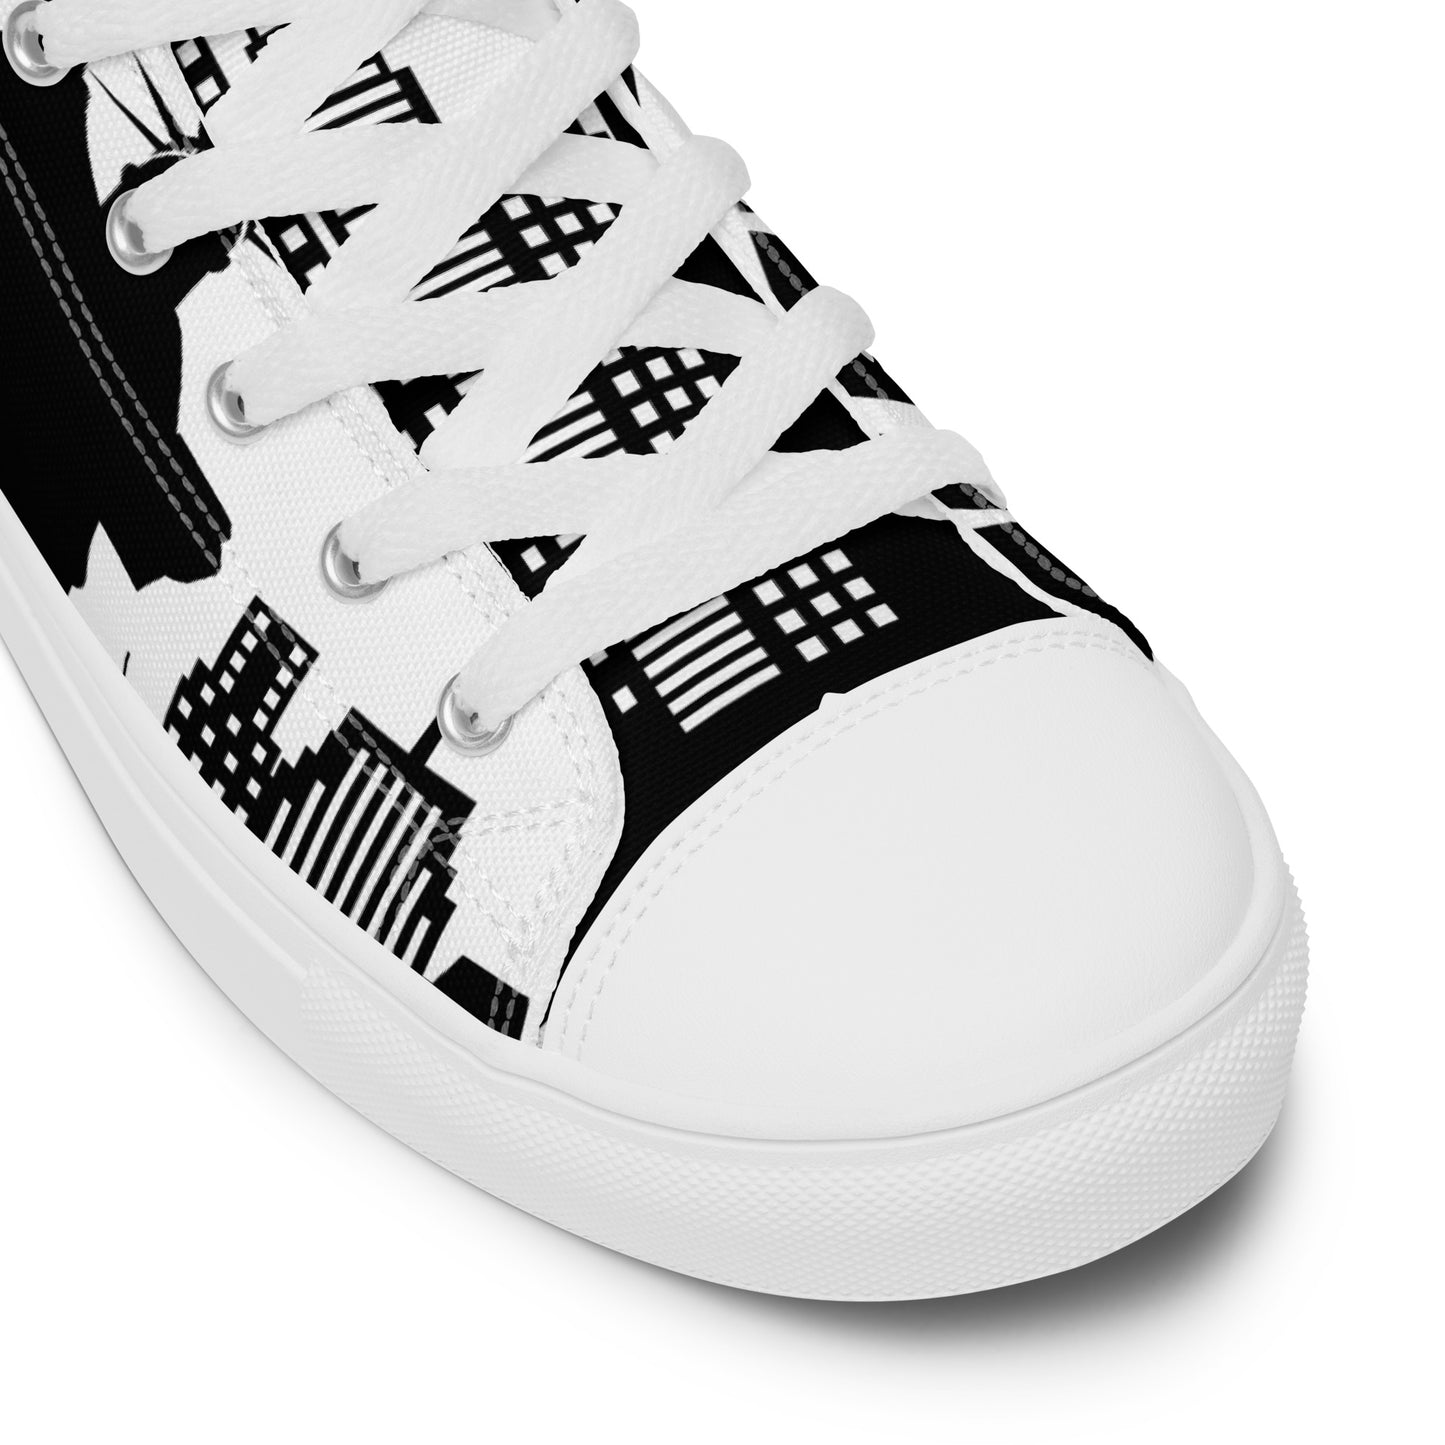 New York Liberty High Top Canvas Shoes